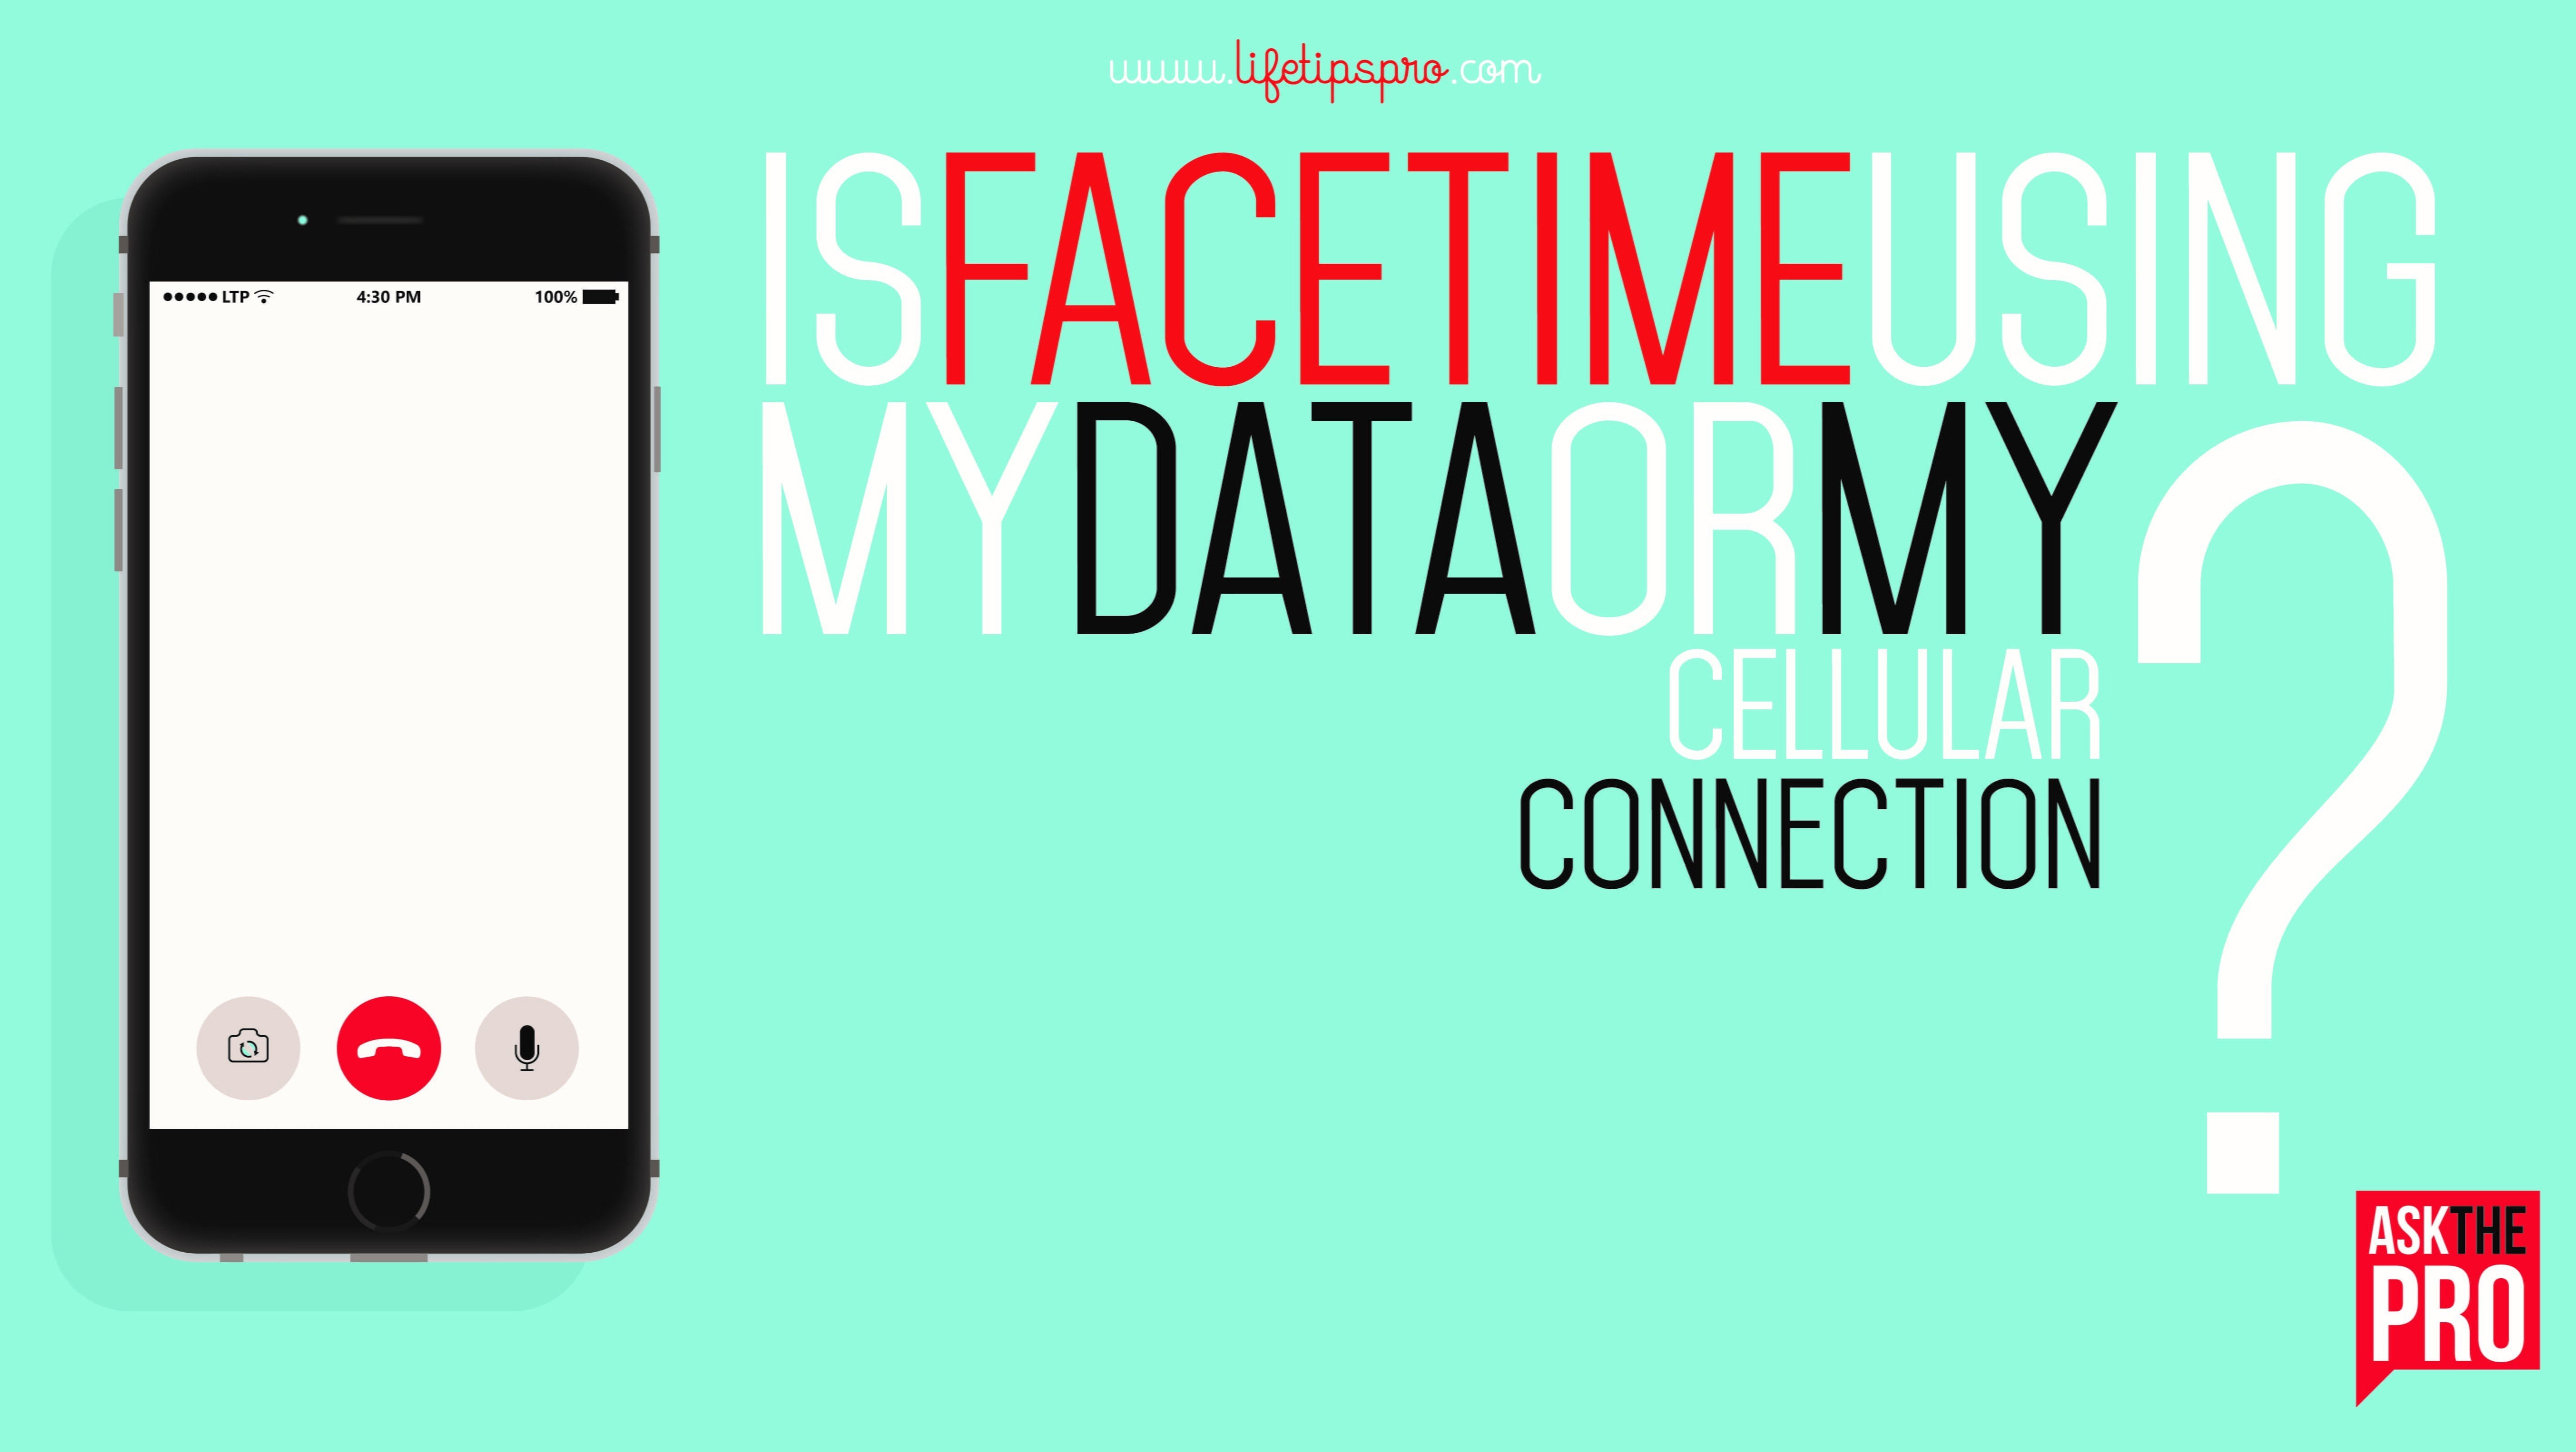 does facetime use data